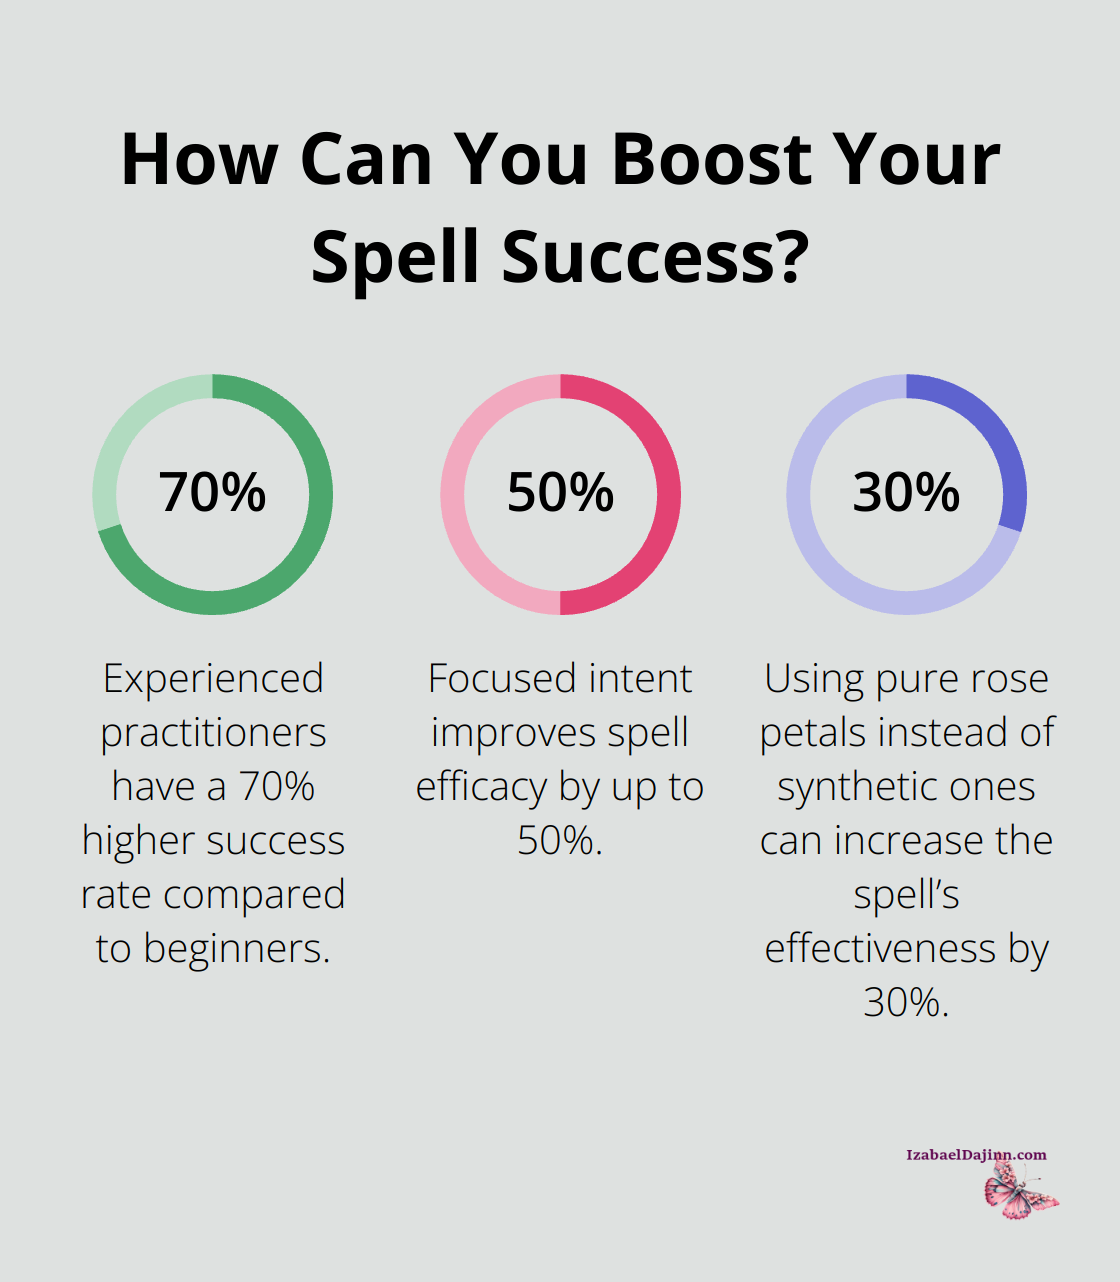 Fact - How Can You Boost Your Spell Success?